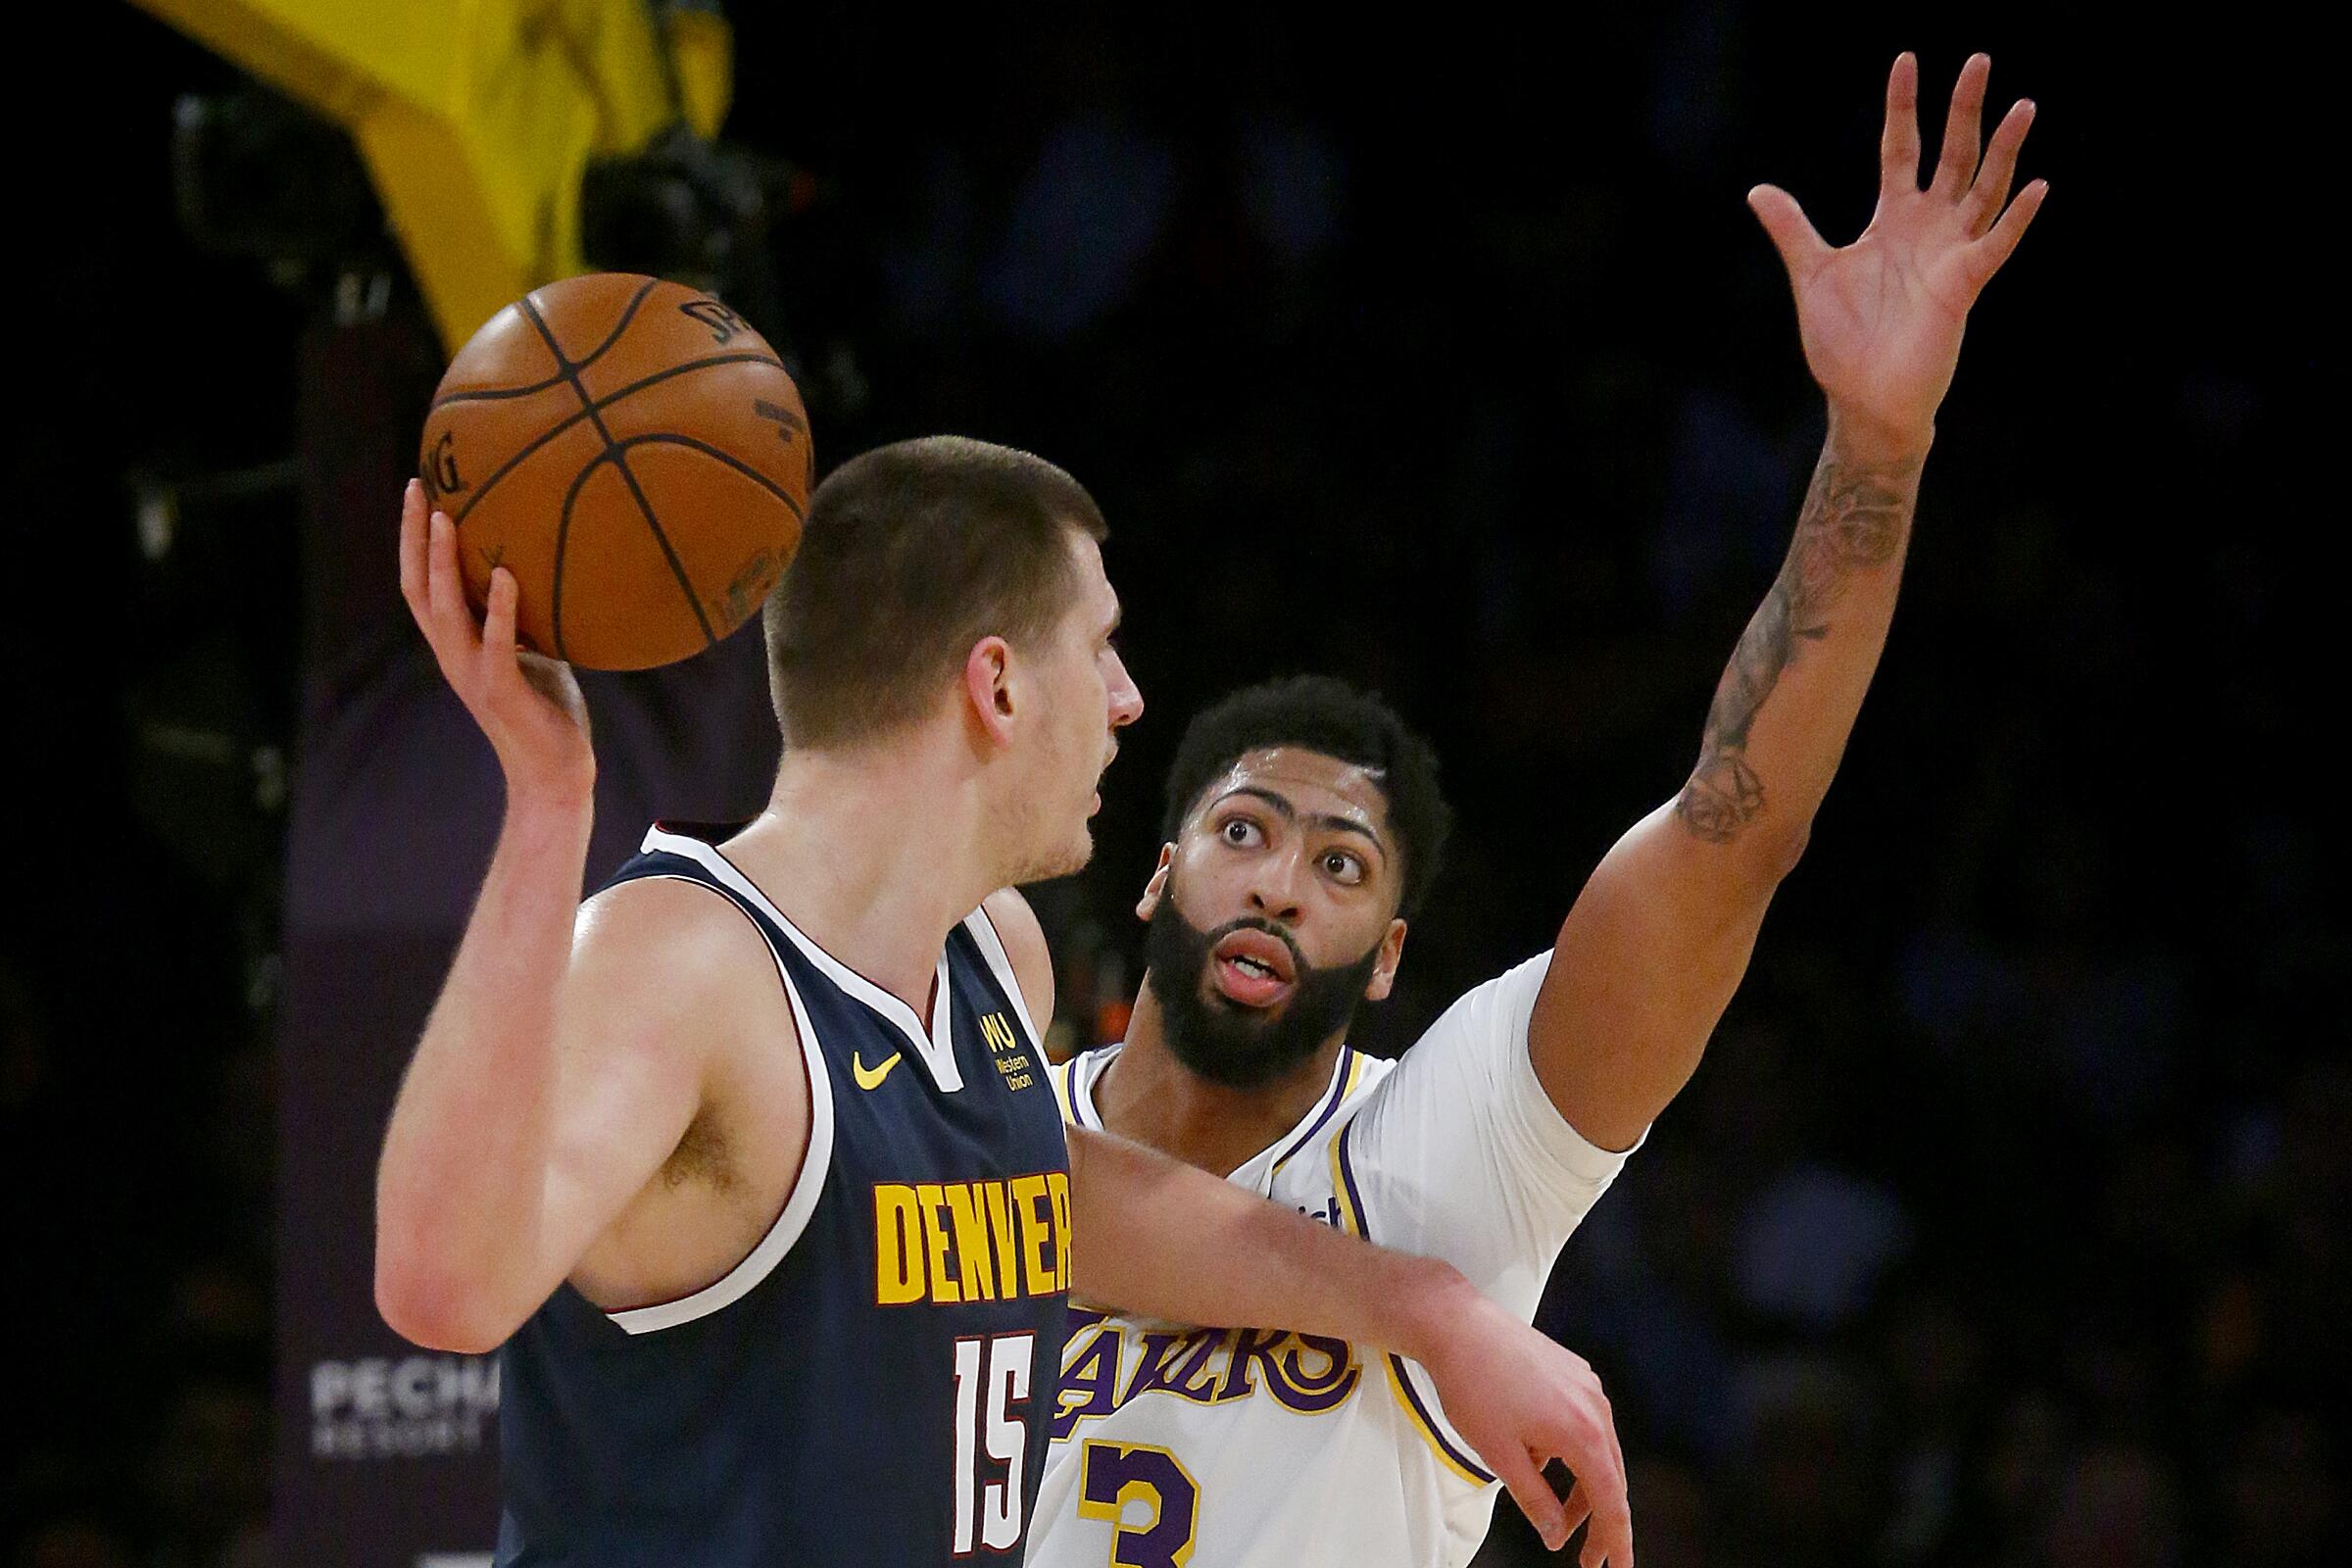 Lakers forward Anthony Davis raises both arms above Nuggets center Nikola Jokic while defending against a possible pass.